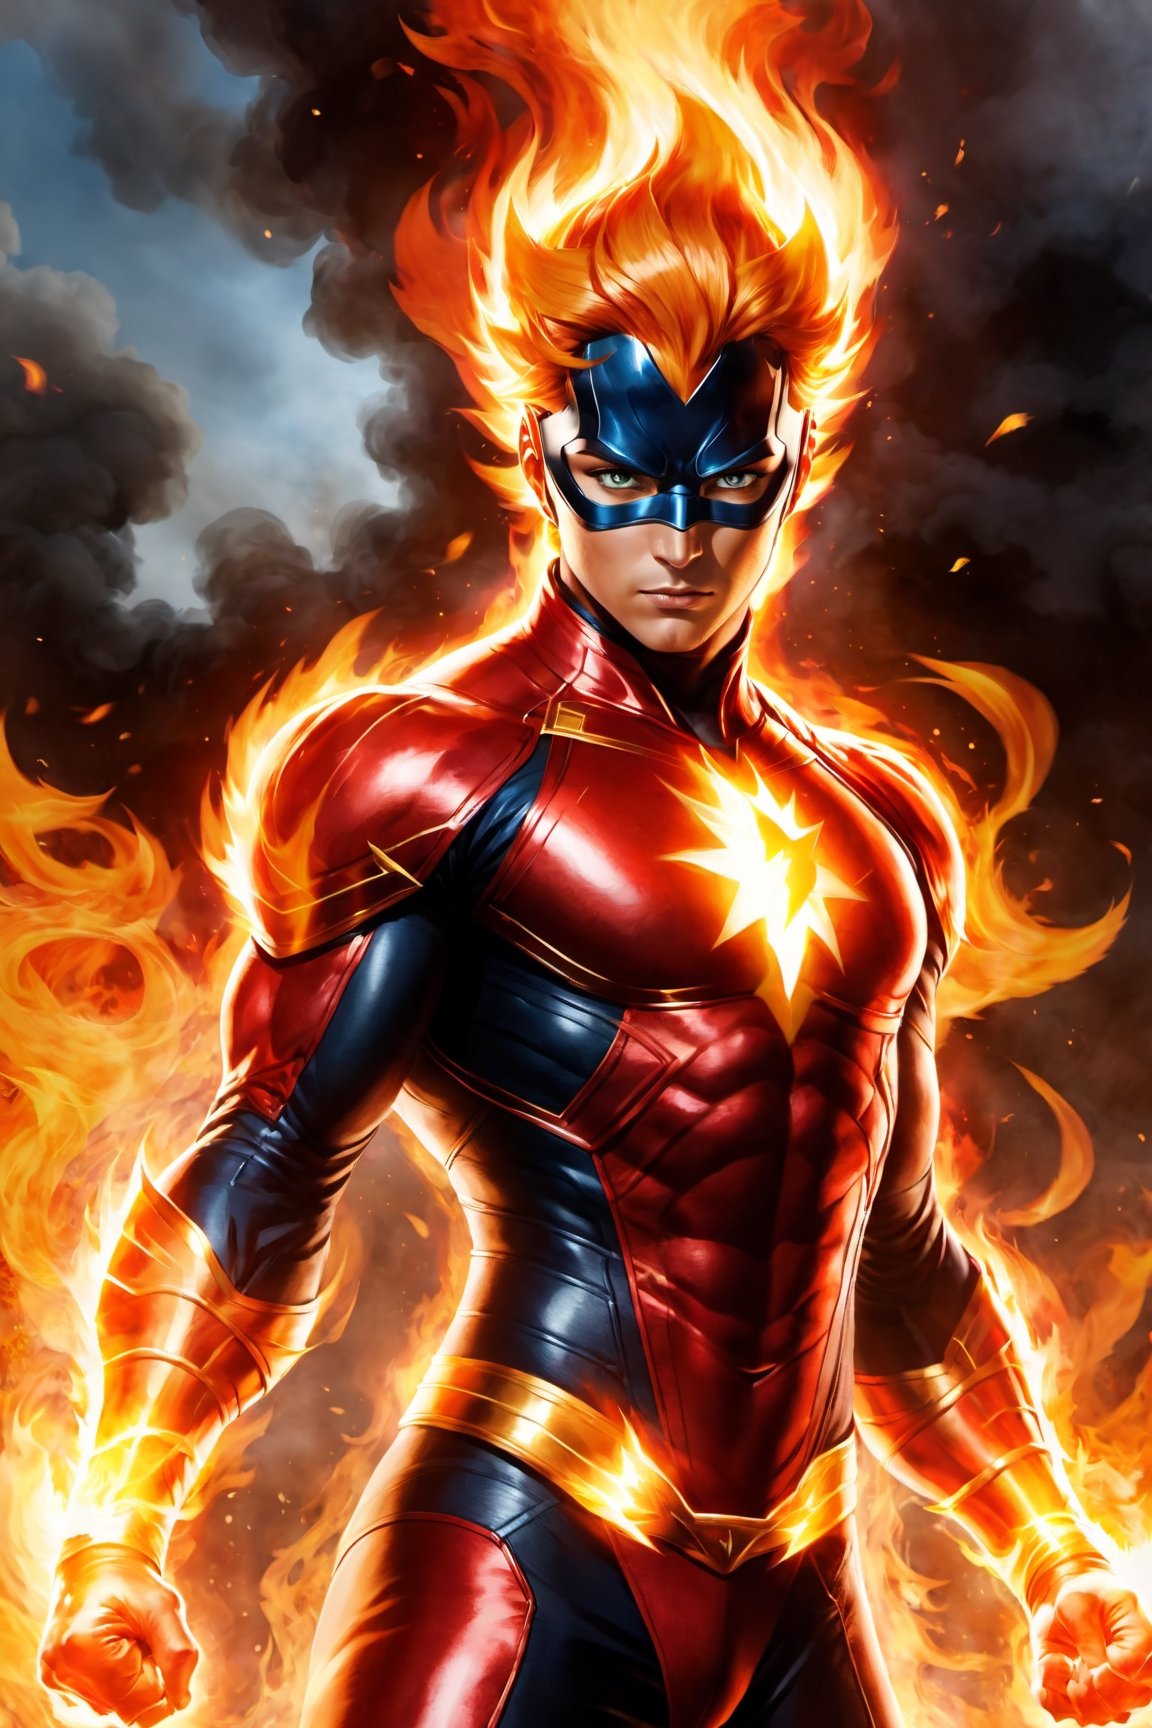 anime:1.9, cartoon:1.9, Imagine a dynamic scene featuring of iconic DC Comics character, enchantress mixed lady_human torch, heroin, superhero, fire deity, muscular, athleticism, combustion, energy, smoke, ashes. Firehair. (fire Eyes:1.6). (athletic:1.6). (incandescent fireball in his hands:1.6). ((concentration of fire in her upright right hand, she is prepared to attack)). ((fire lit in the palms of his hands)). Visualize him engulfed in flames, sexy pose, very big breast, swinging, radiating with fiery intensity. (fire-colored suit with red details:1.6). ((His body burns with great intensity, emitting light and heat, burning in flames)). Craft a prompt for a super detailed, 16k Ultra HDR image capturing the essence of Human Torch's blazing presence – perfect face, flames, and dynamic pose. (brightness, vibe, vitality, energy, halo, halo, aura:1.5), (arms wrapped in flames, fire). flashes of fire surround his body. Choose a background that complements his character, creating a cinematic masterpiece with high realism and top-notch image quality, fire element:1.5,3d_toon_xl:0.2, xl-shanbailing-1003fire-000010:0.6, demonictech:0.1, MagmaTech:0.1human on fire:1.2, feh:0.4, firepunch:1.3, zeldaALBW:0.1, makioze:0.4, fire_lit_DC:0.5, DonMF1re:0.5, FireAI:0.6, Cursed energy:0.5, XieS:0.3, r1ge - AnimeRage:1.3, :JuggerCineXL2:0.6,add_detail:0.6,3d toon style,Movie Still,DonMCyb3rN3cr0XL-000009:0.3